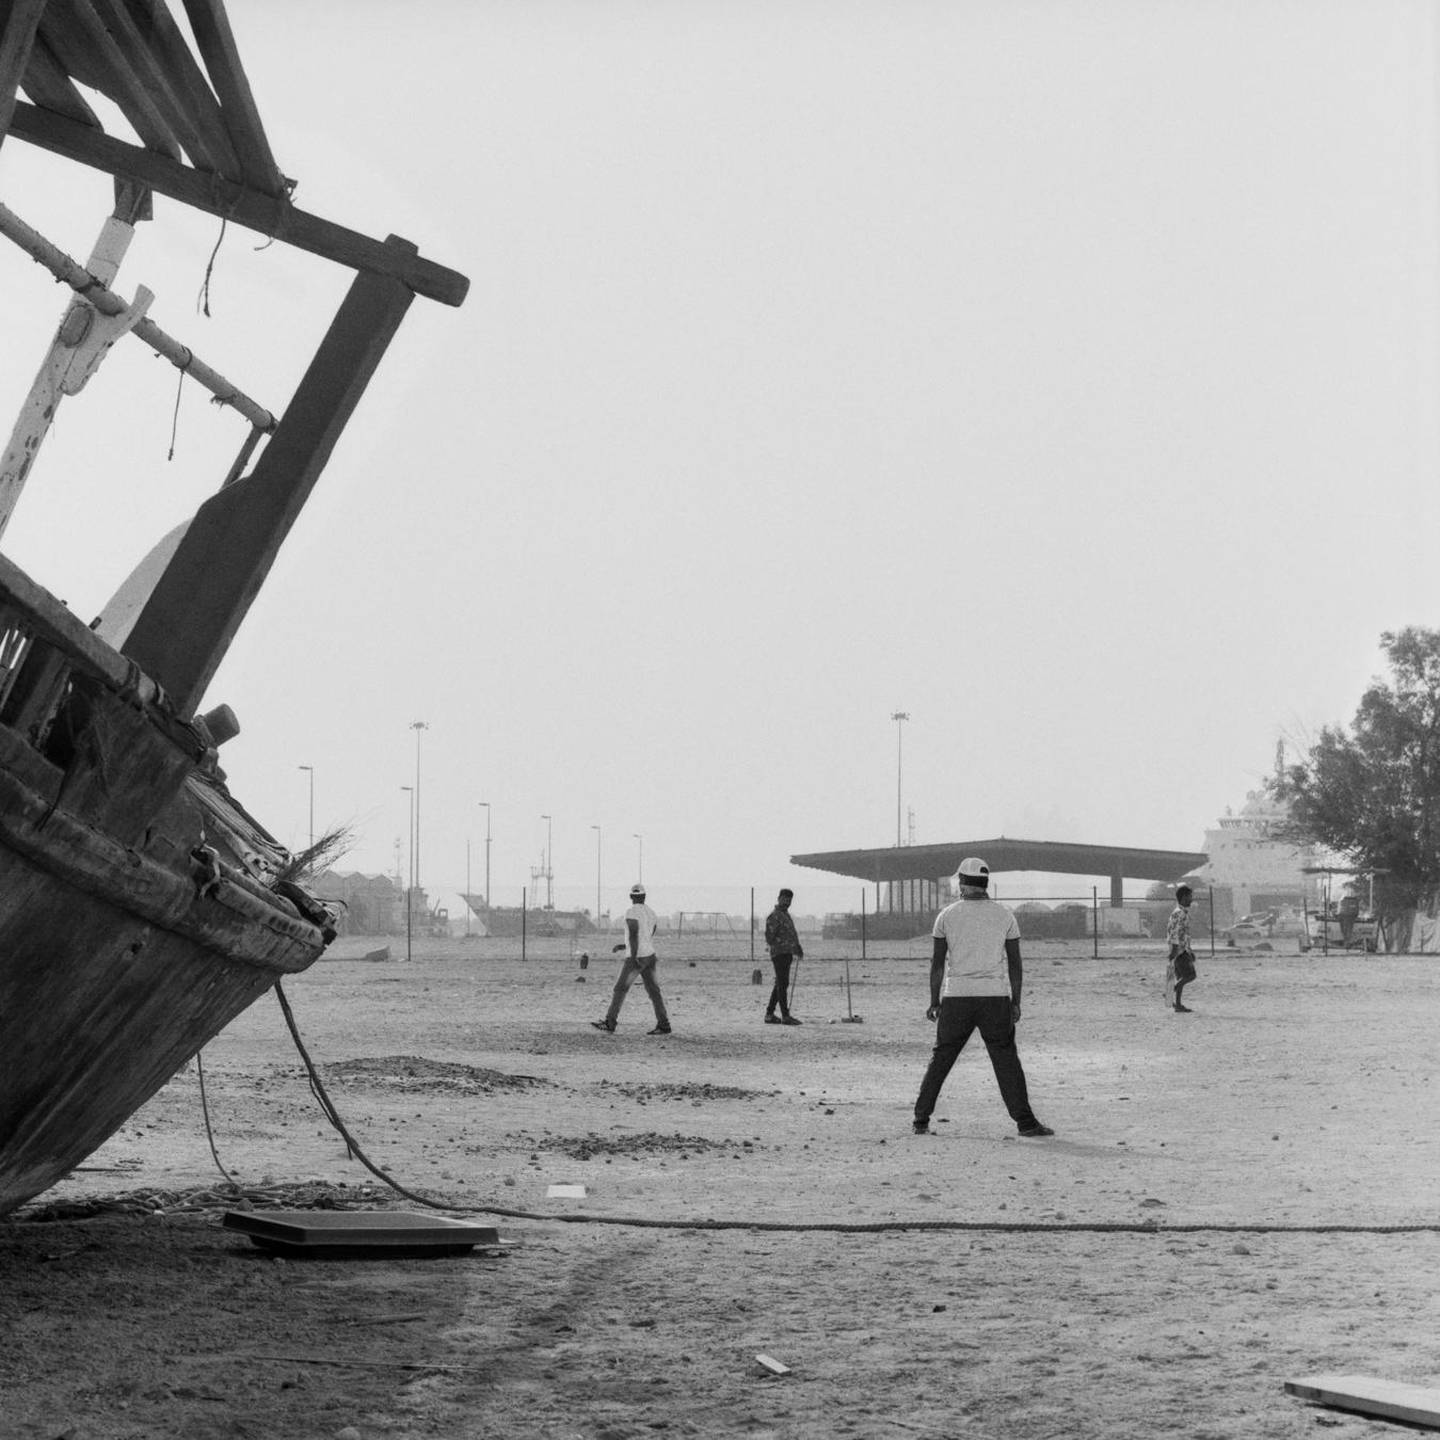 Mazna Almazrouei looks at the role of public space by photographing cricket players in abandoned pockets of Mina Zayed. Courtesy of the artist